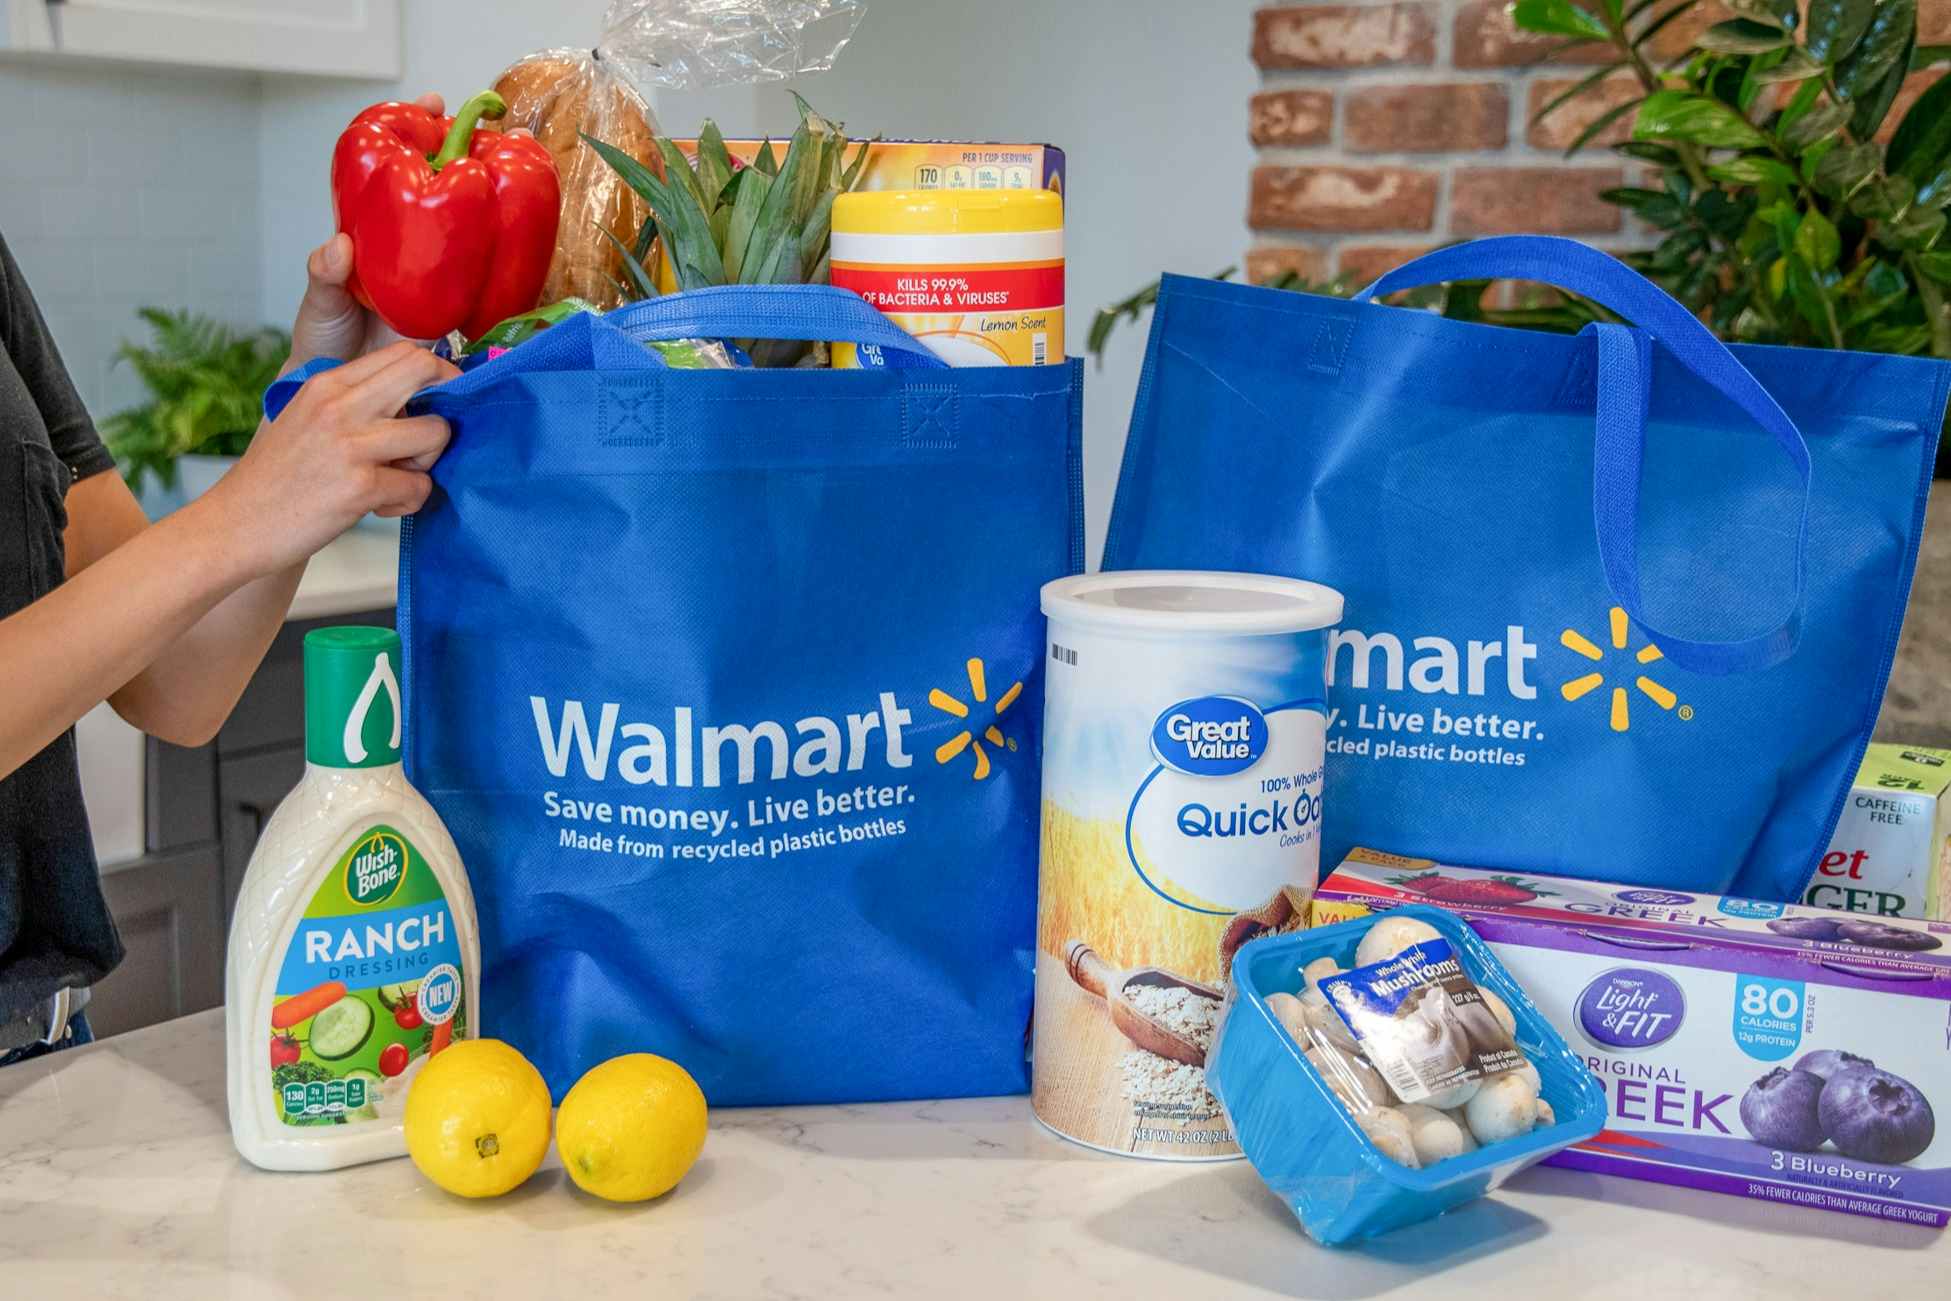 A woman pulling groceries out of Walmart reusable grocery bags.